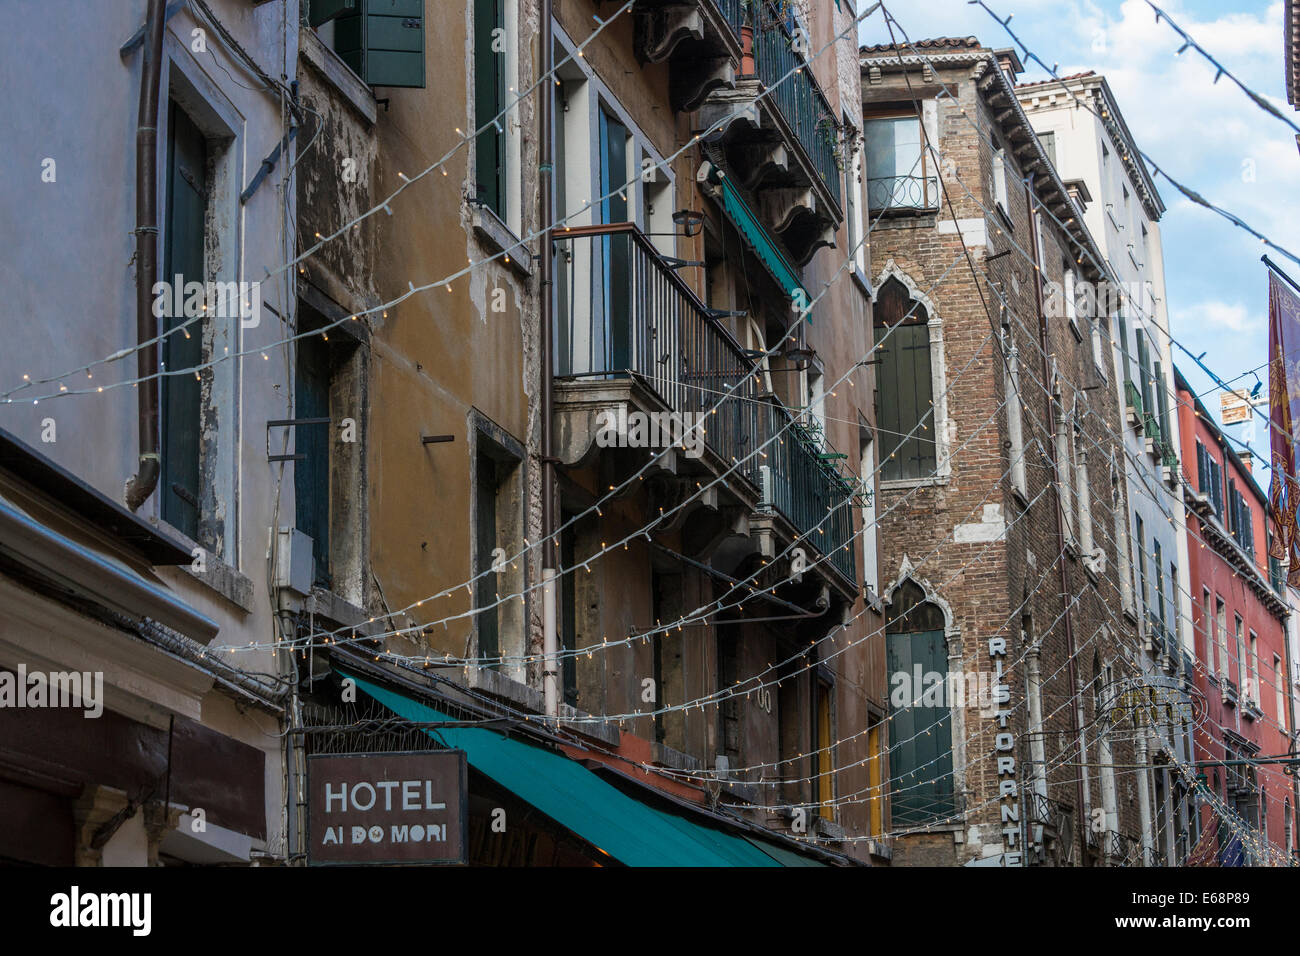 String of lights adorn the shops across a main pedestrian thoroughfare in Venice. Stock Photo